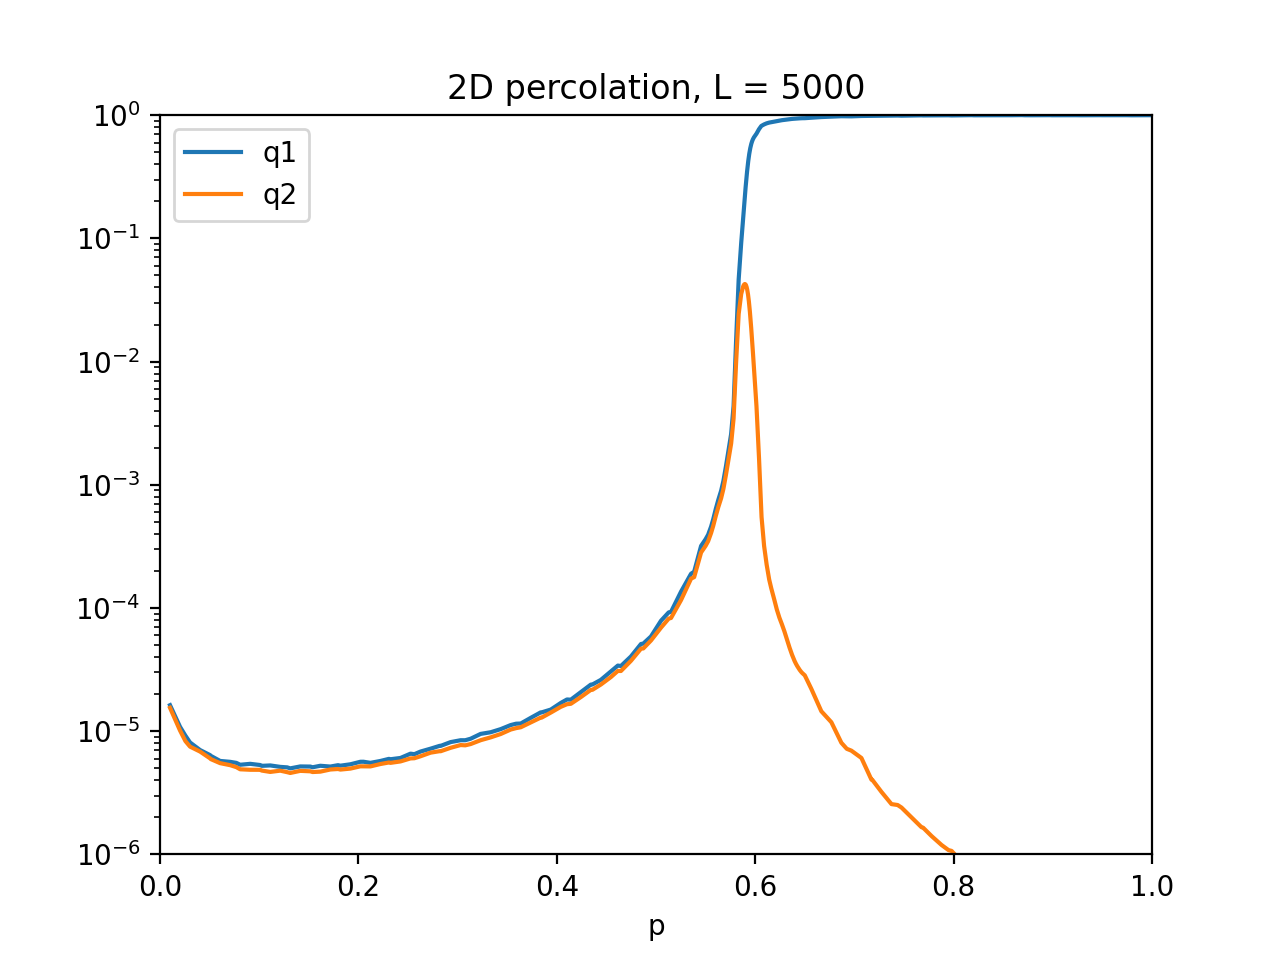 Probability of an occupied site being in the largest and second-largest clusters in a 2D grid with L = 5000.